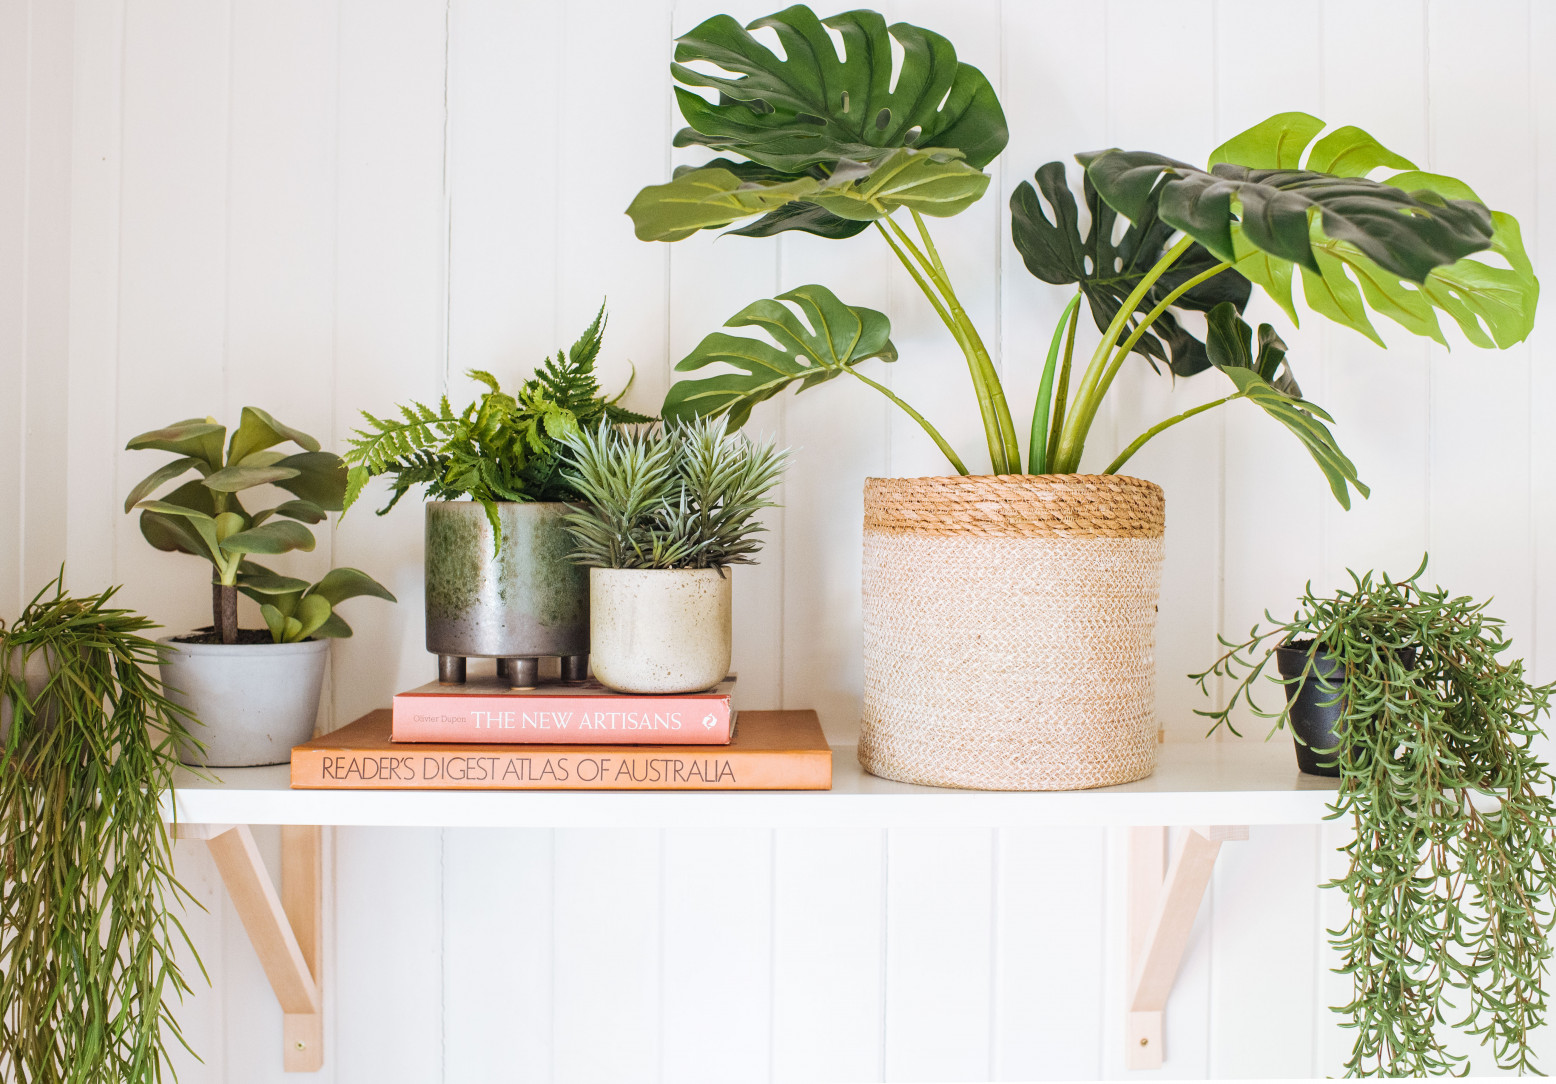 How to Decorate With Fake Plants (And Where to Find the Best Faux Greenery)  - House by Hoff